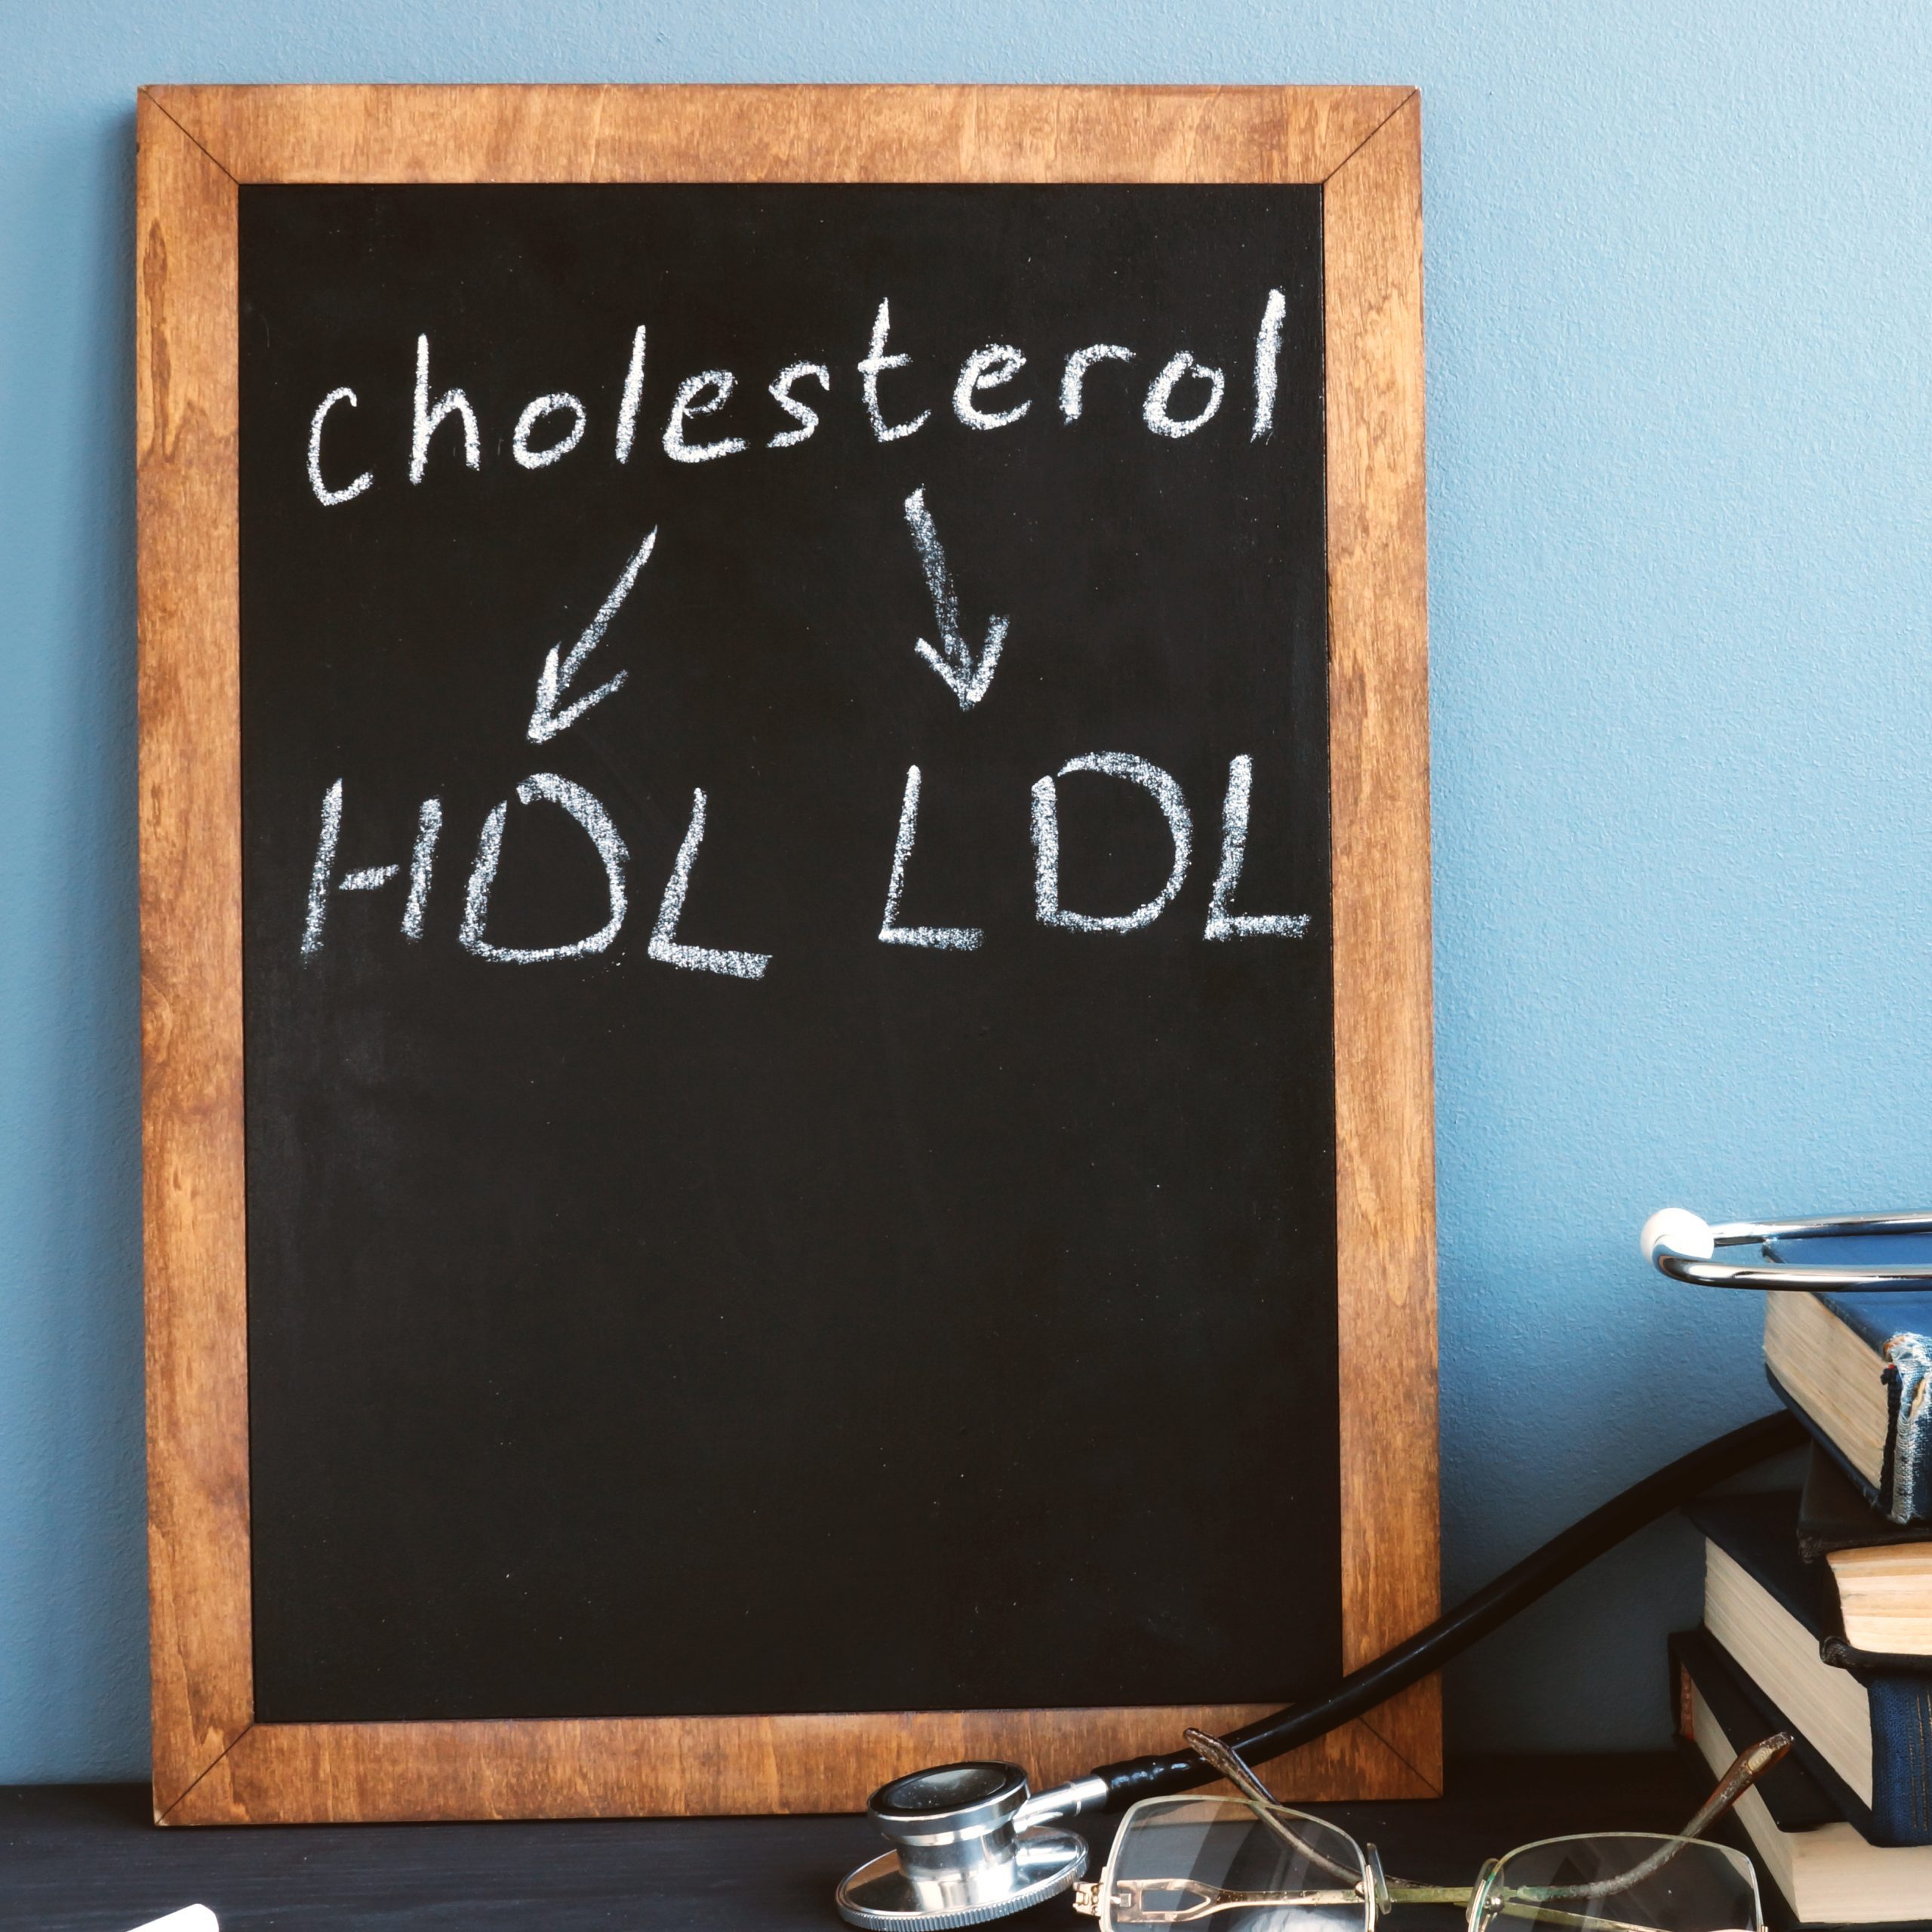 HDL vs. LDL Cholesterol: What's the Difference?